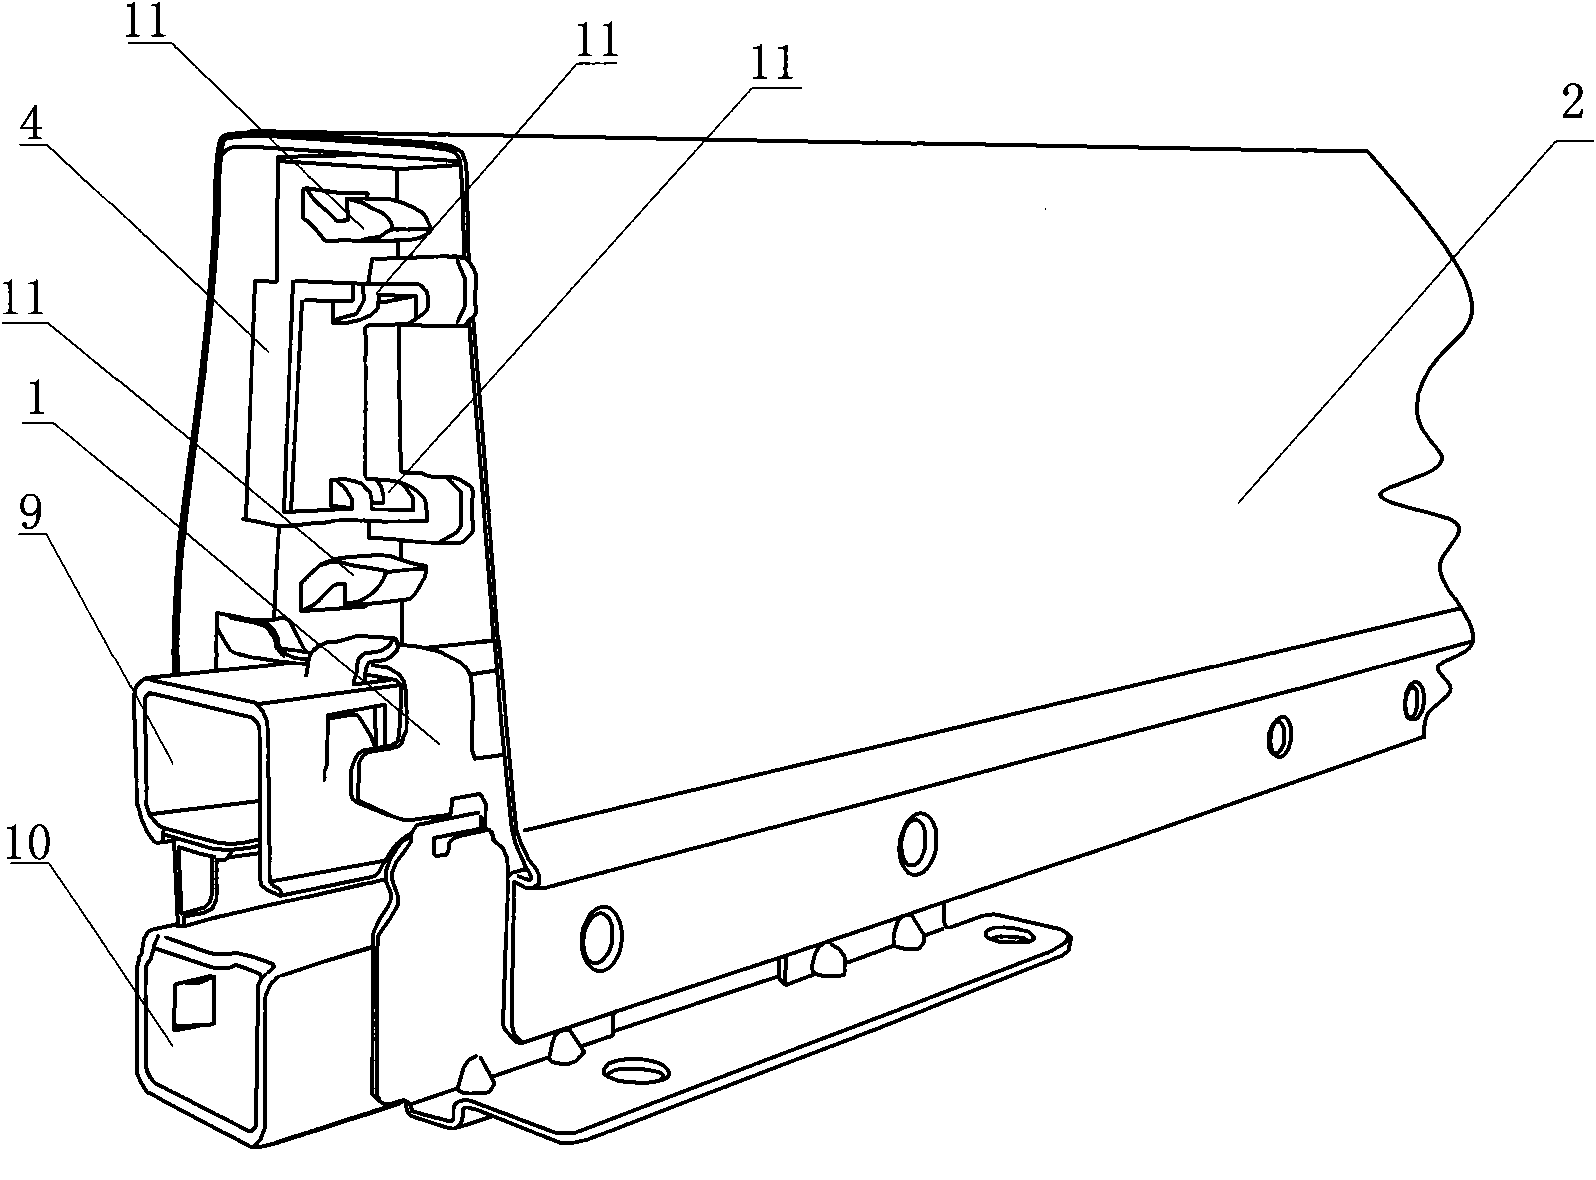 Drawer backboard connecting device